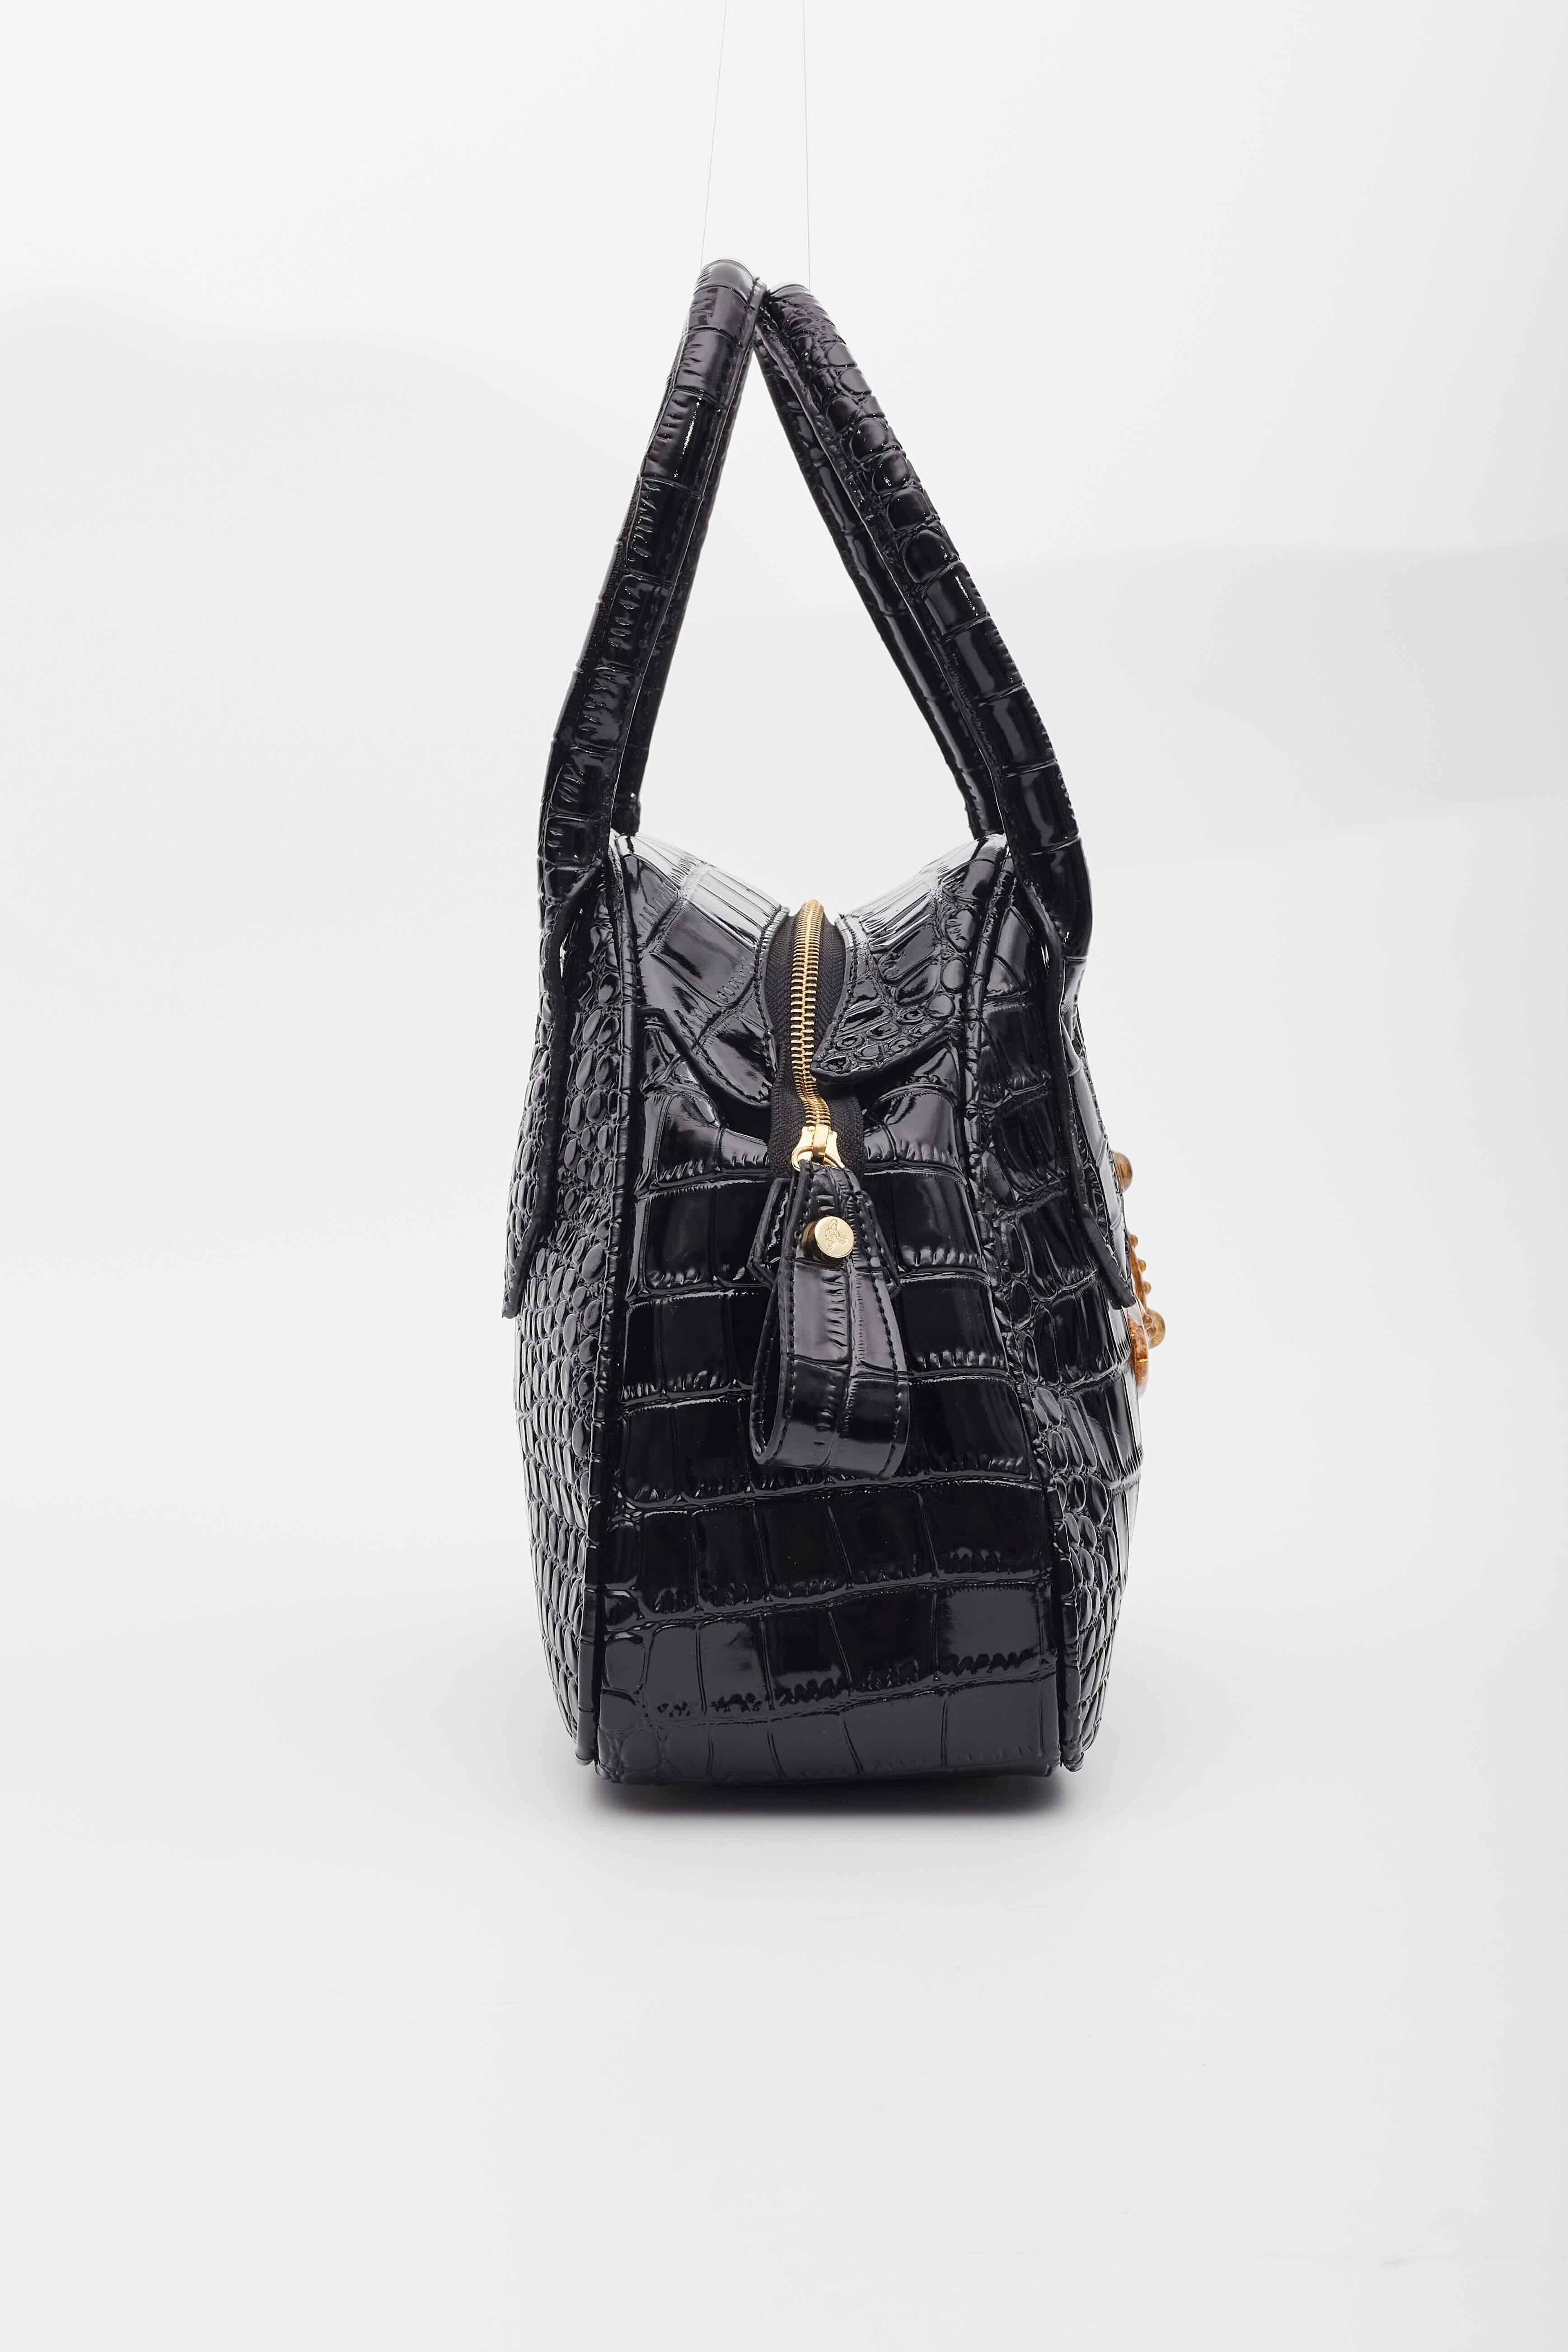 Vivienne Westwood Black Crocodile Chancery Handbag In Excellent Condition For Sale In Montreal, Quebec